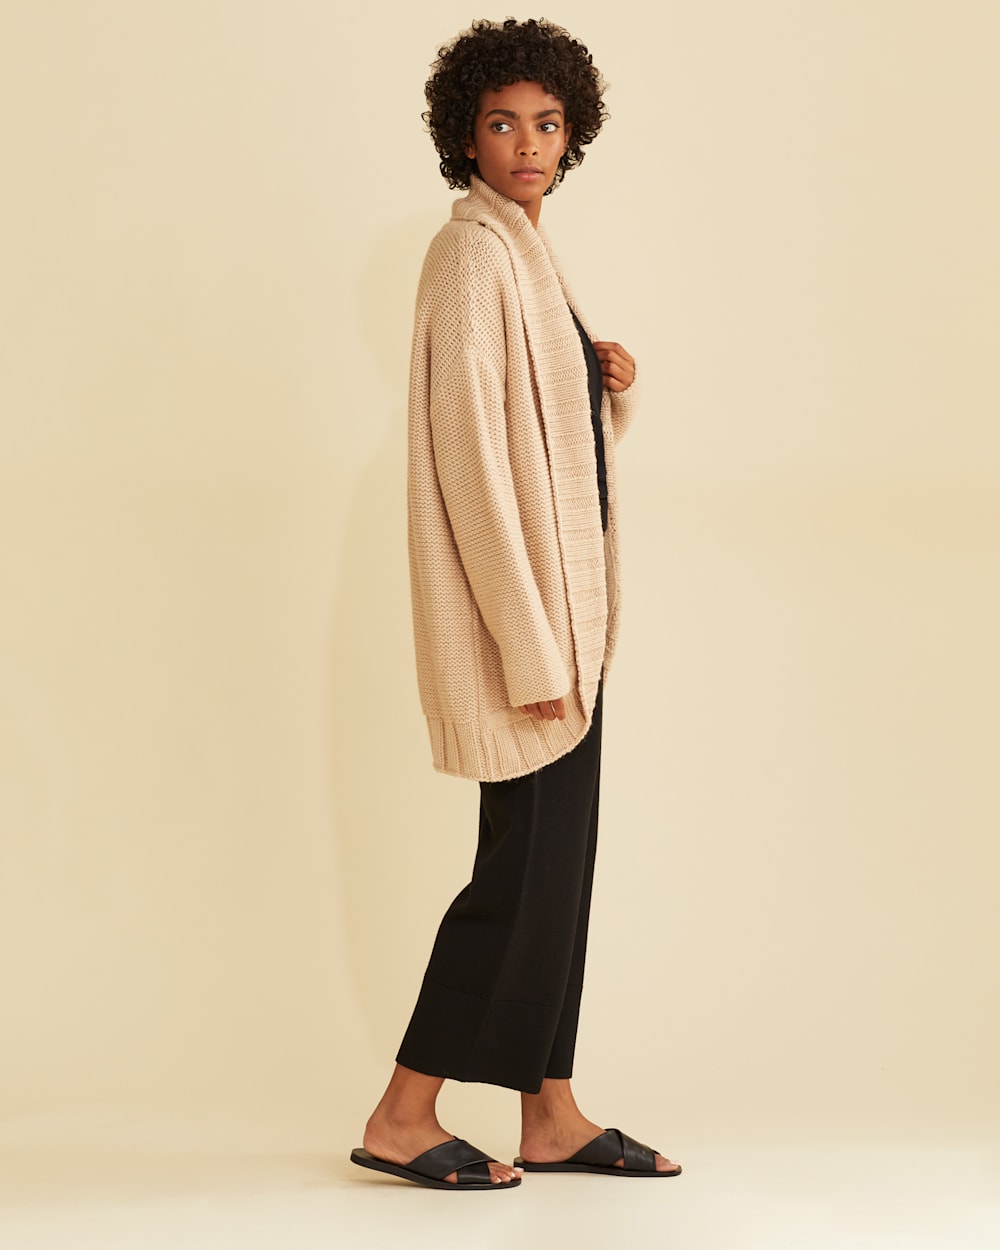 ALTERNATE VIEW OF WOMEN'S LUXE COCOON CARDIGAN IN FAWN image number 2